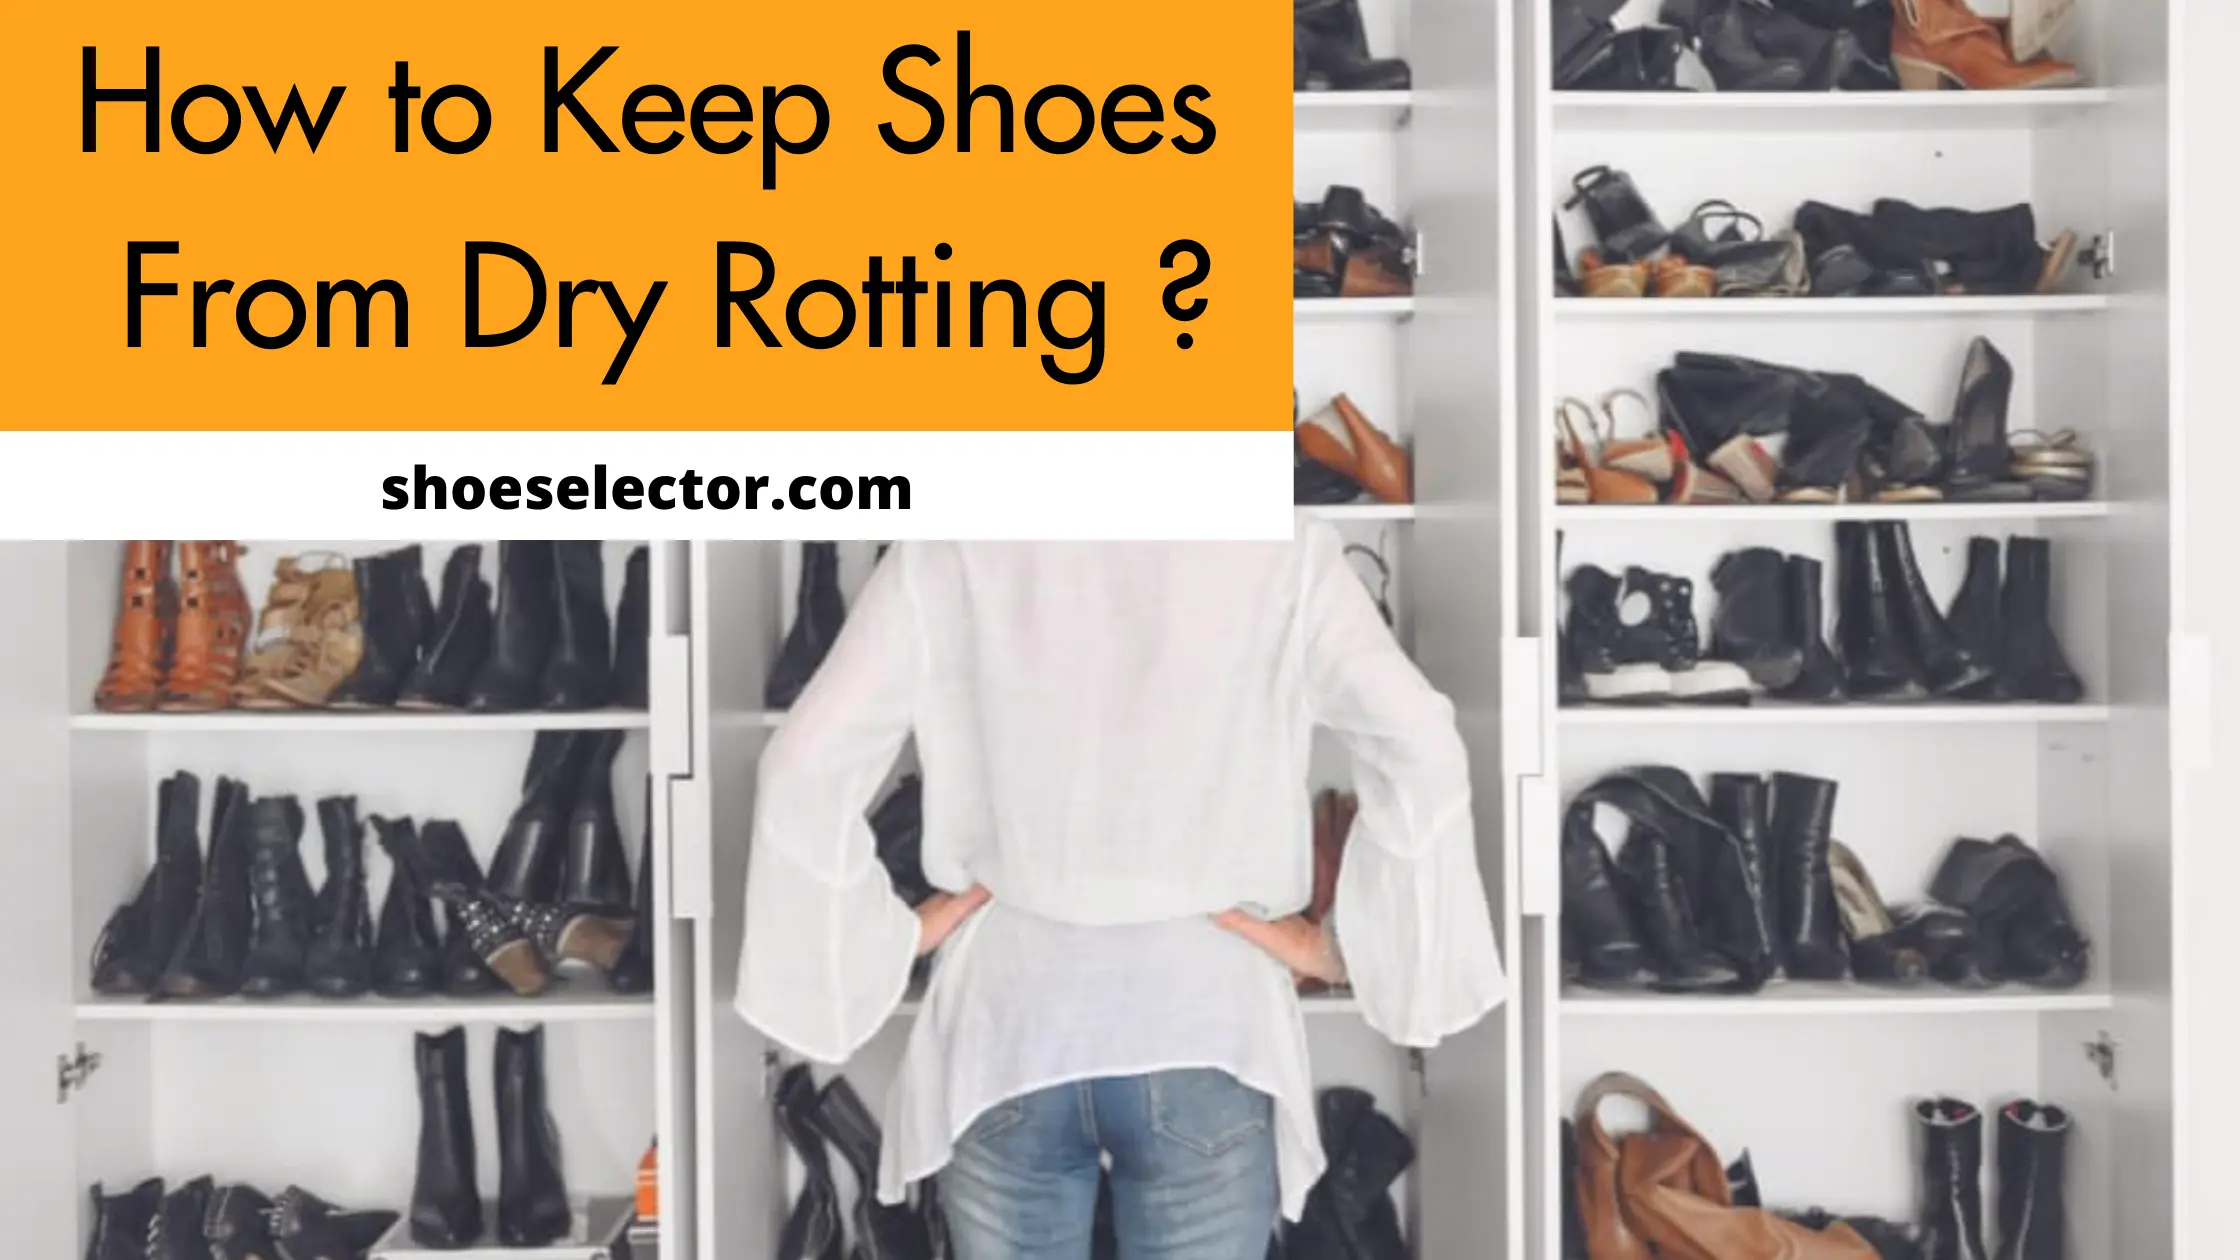 How To Keep Shoes From Dry Rotting? Recommended Guide